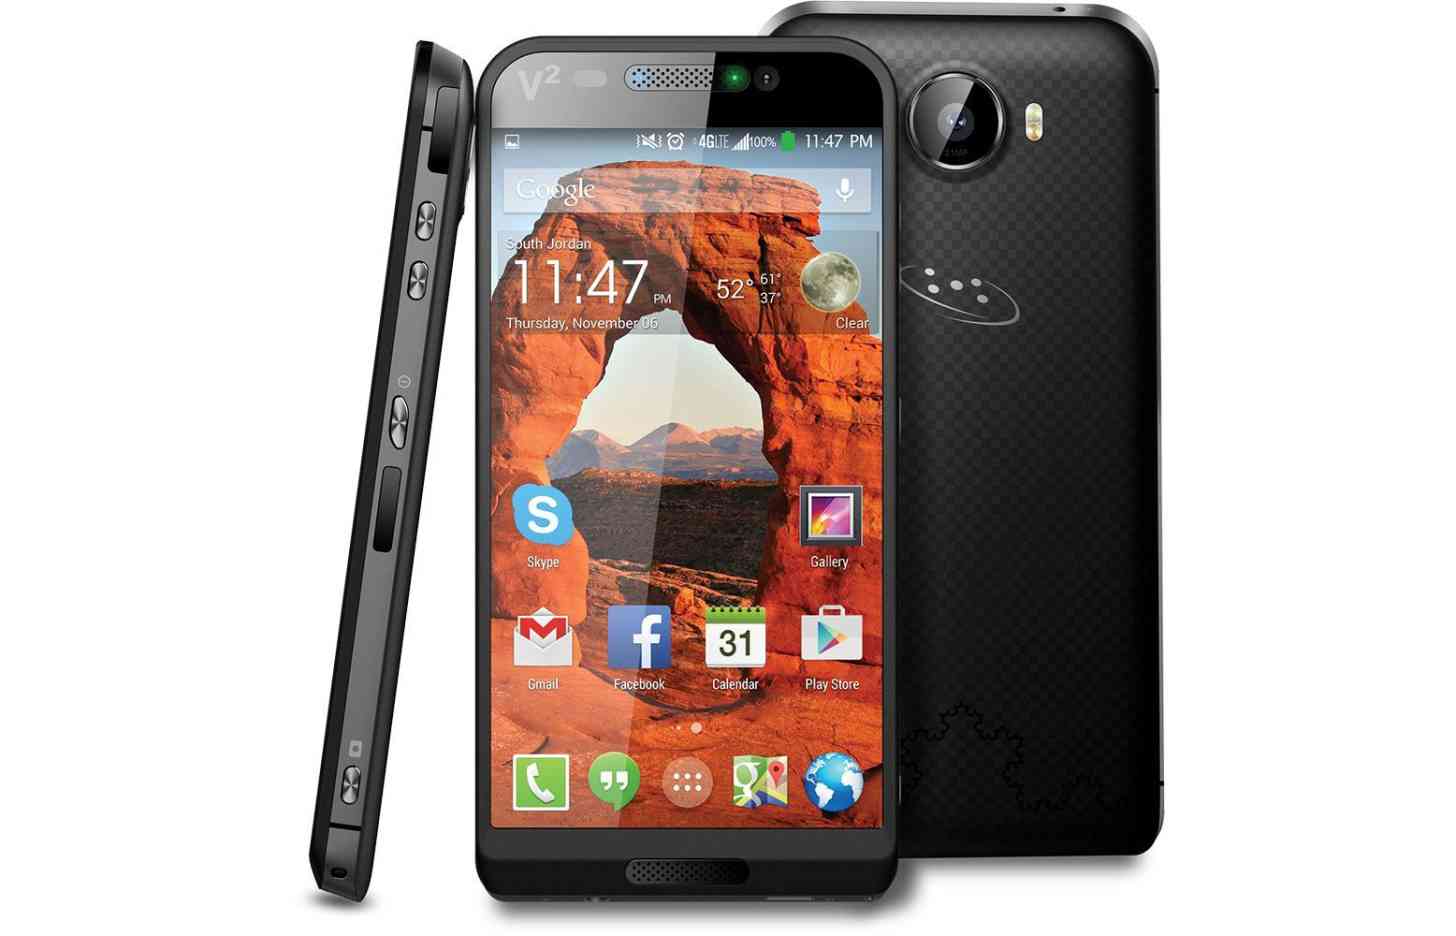 Saygus V2 Android smartphone official